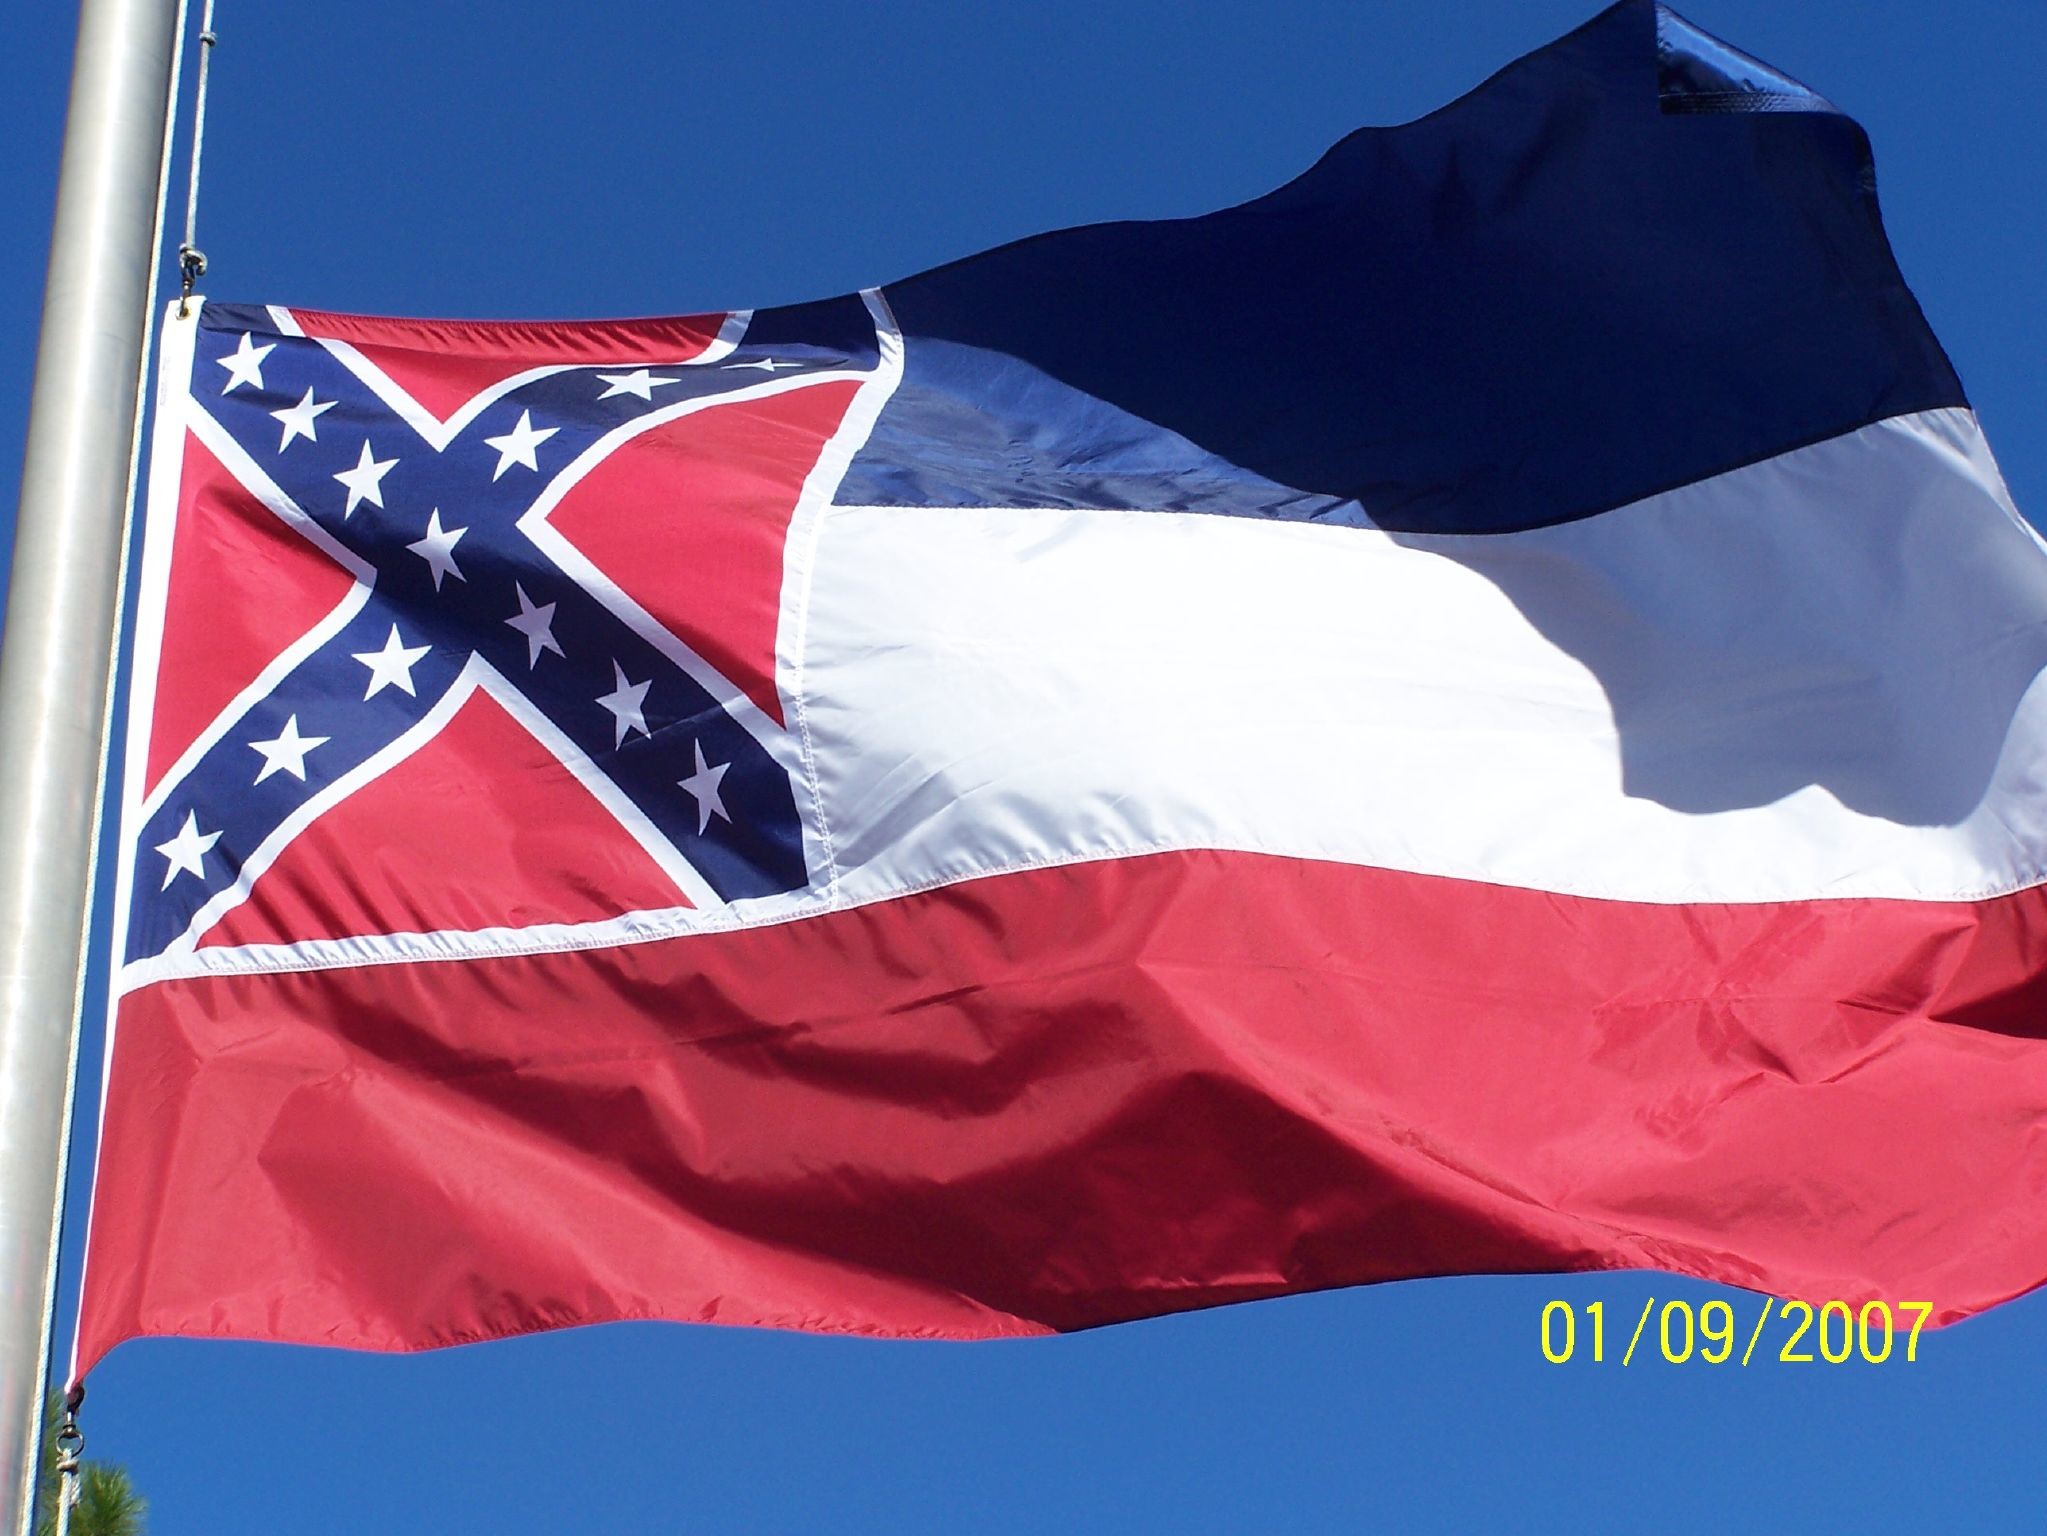 2047x1536 Pin Southern Pride Rebel Flag Wallpaper For Iphone App Info on .